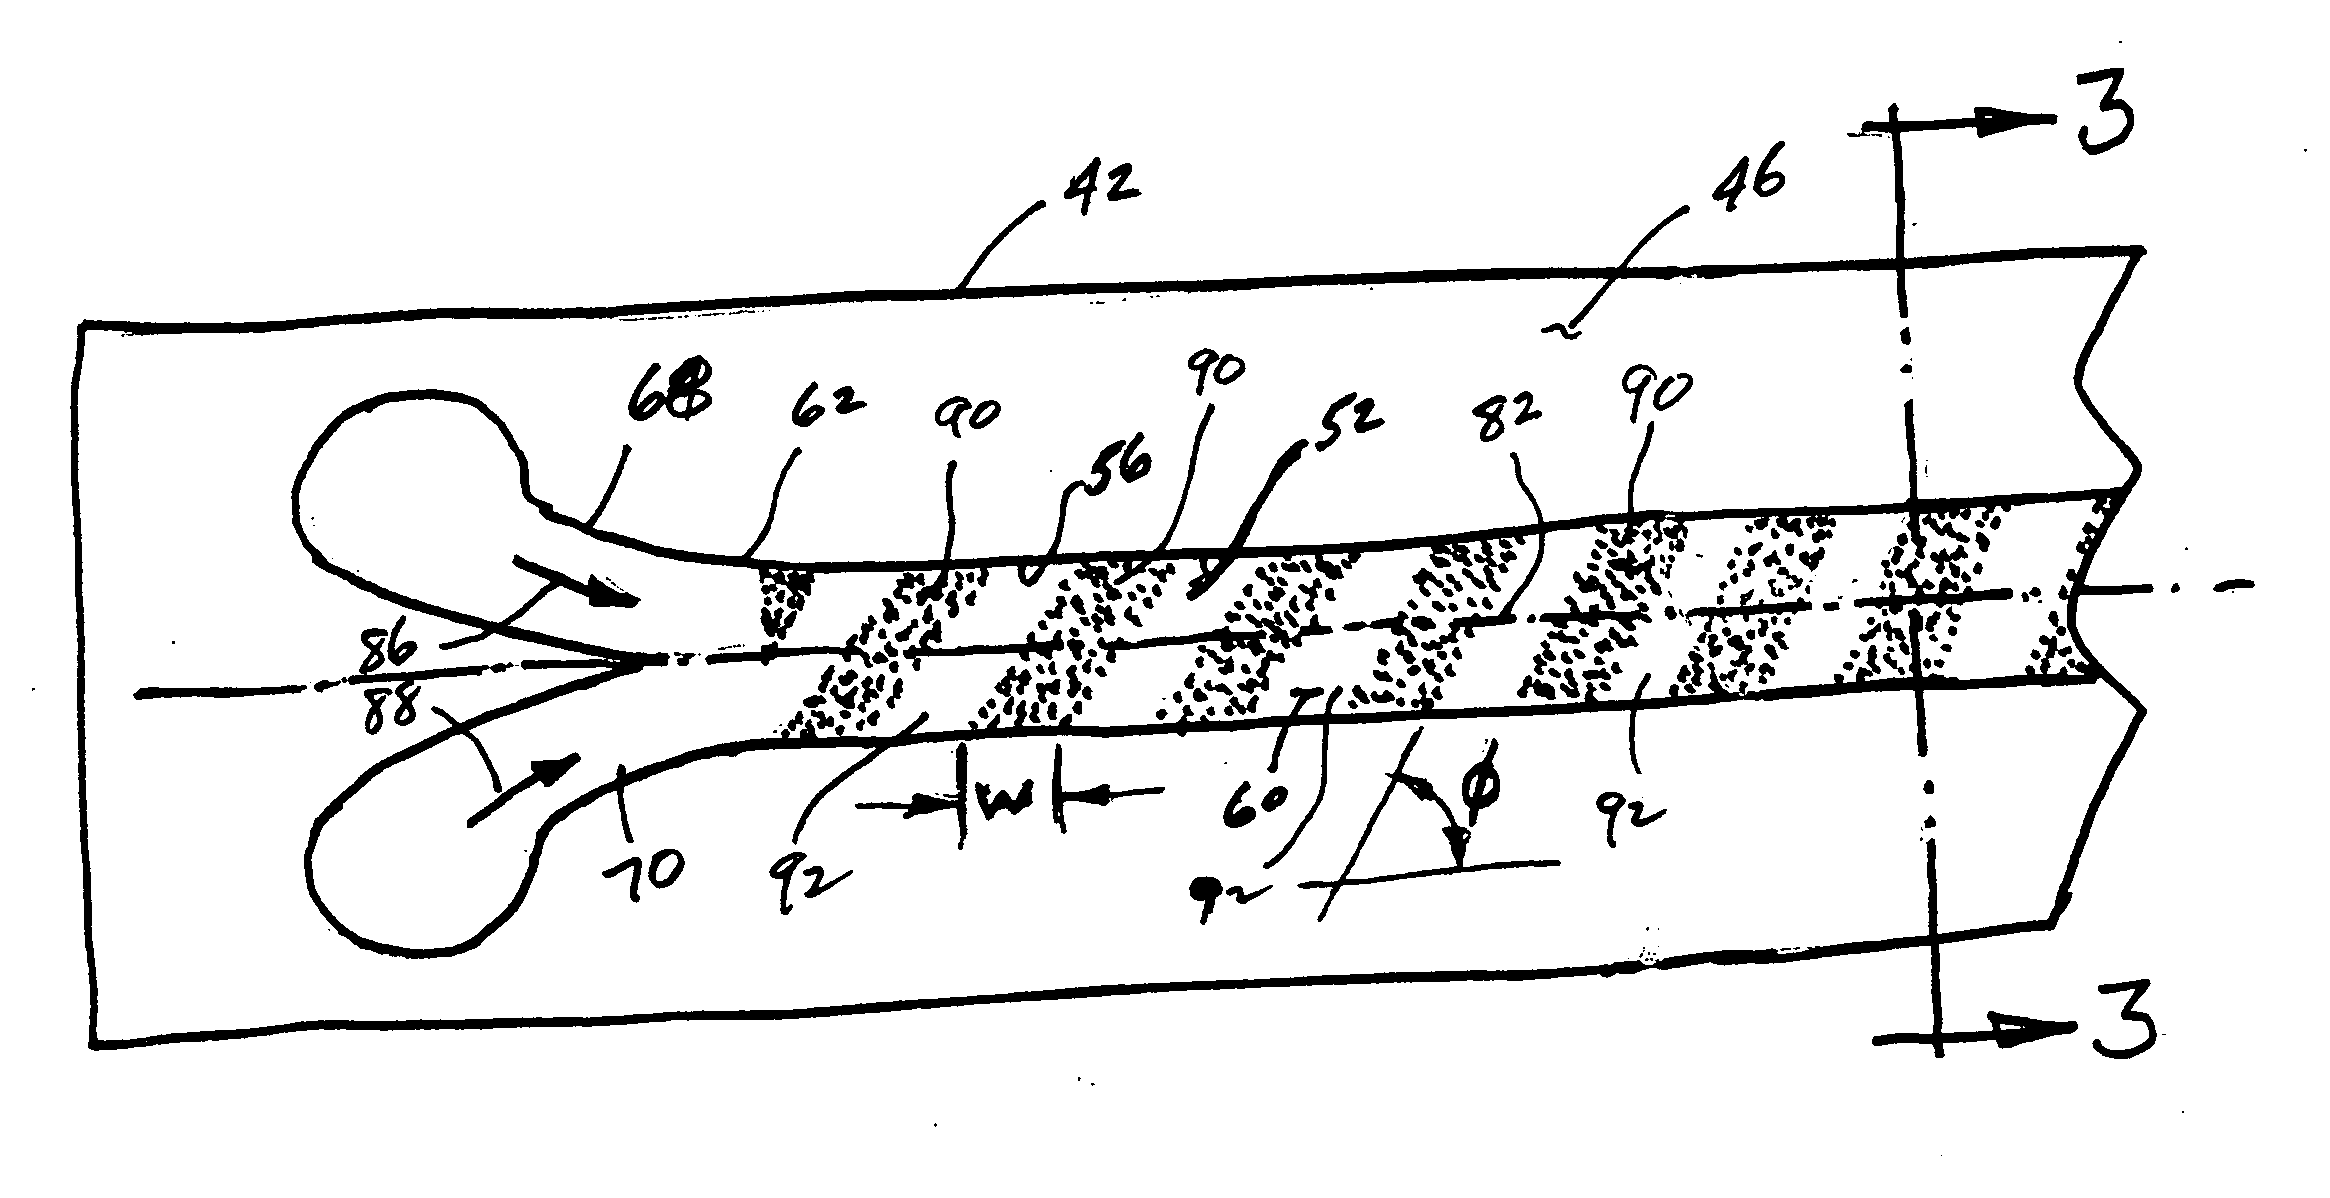 Fluidic mixing structure, method for fabricating same, and mixing method